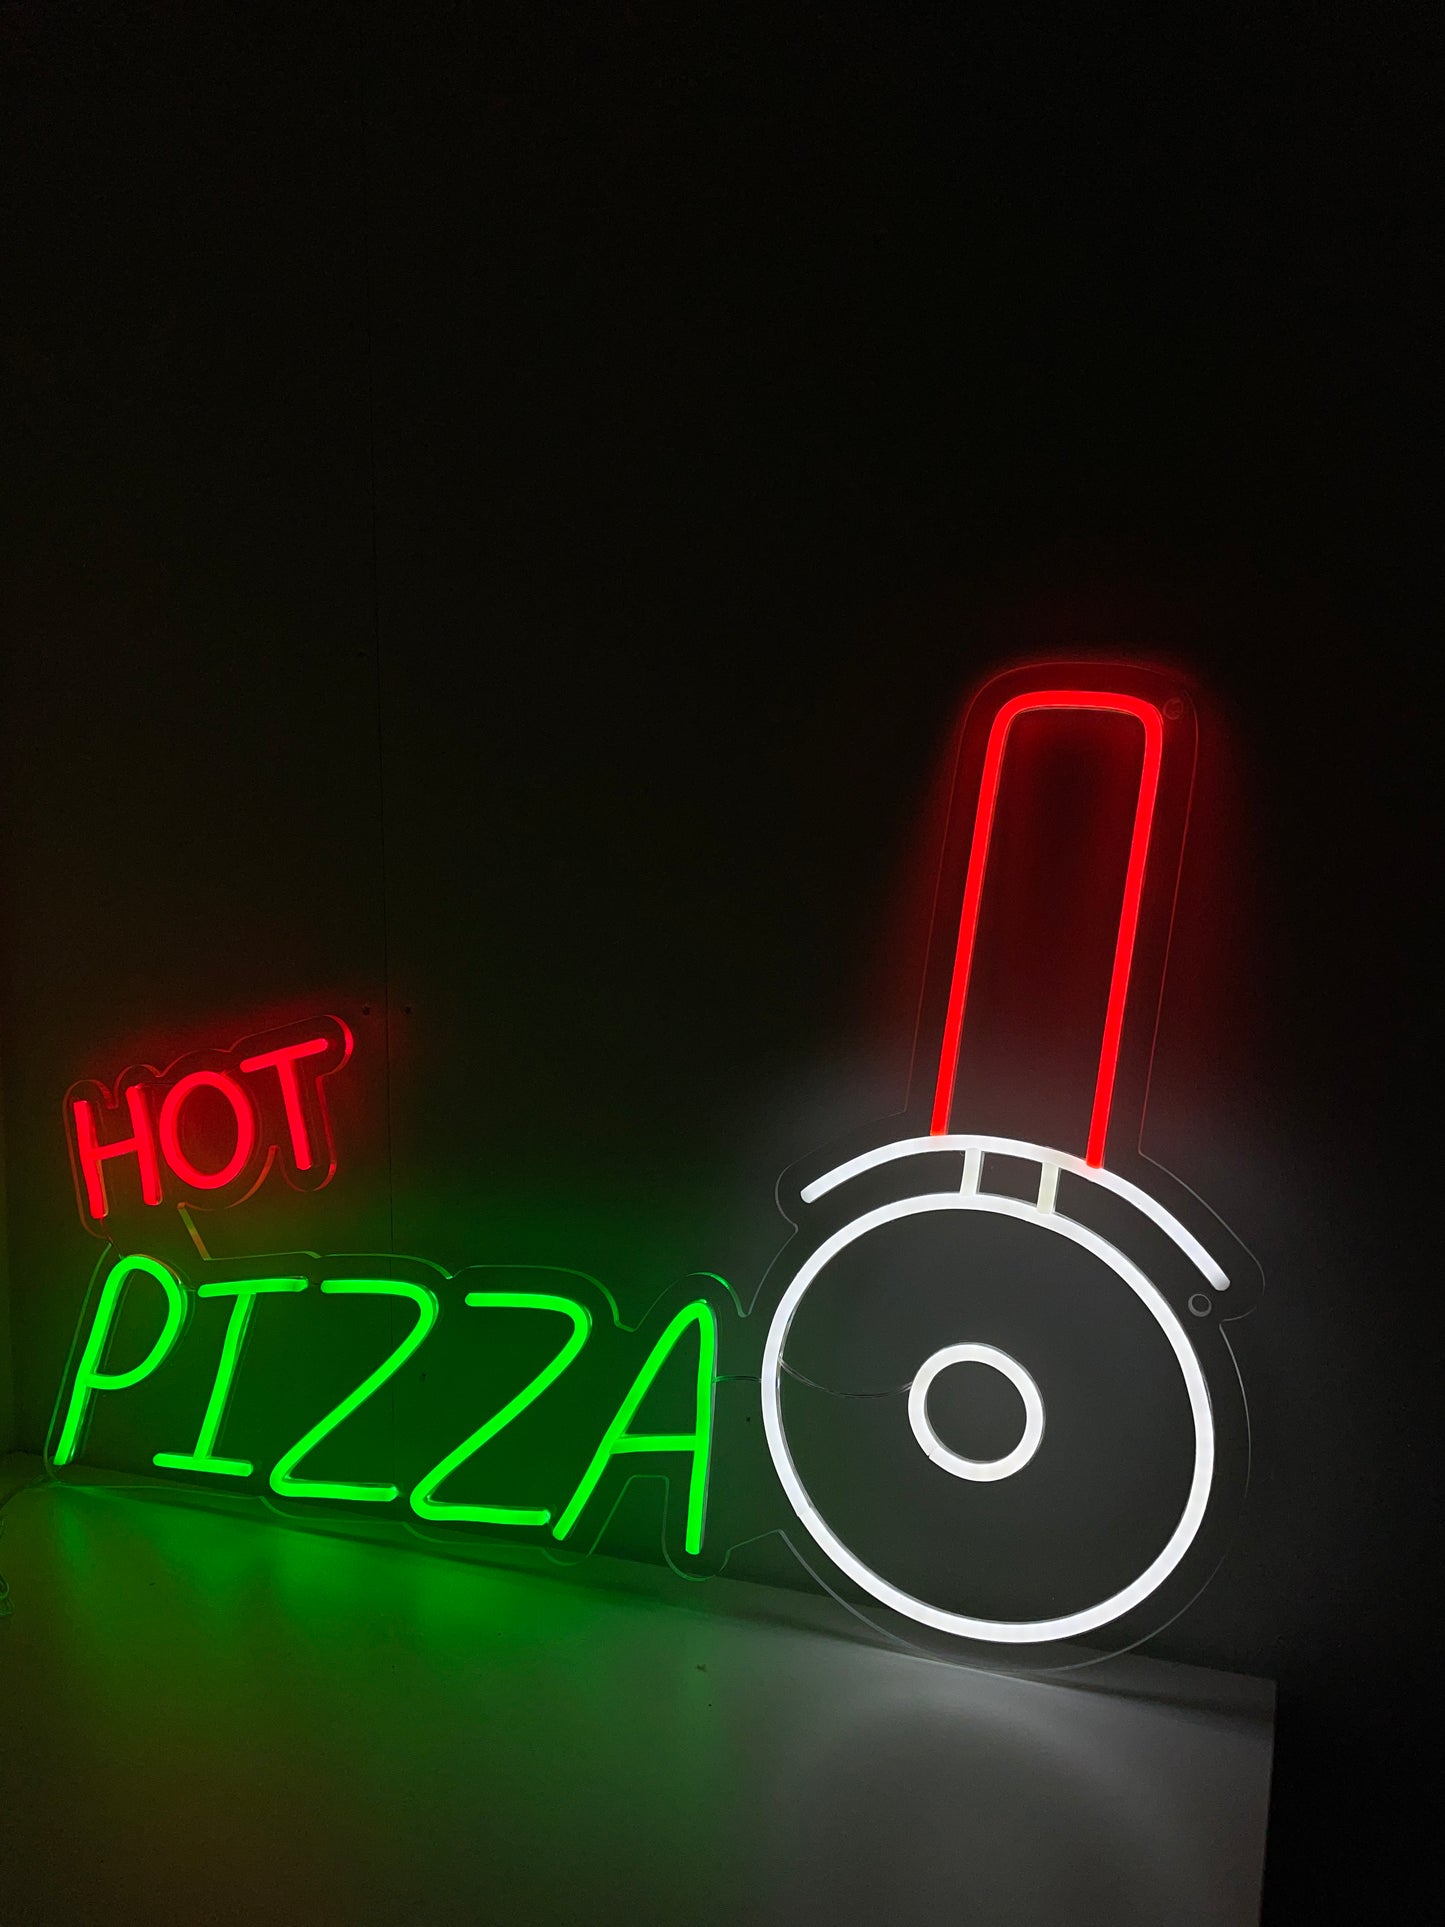 Hot Pizza Neon Sign